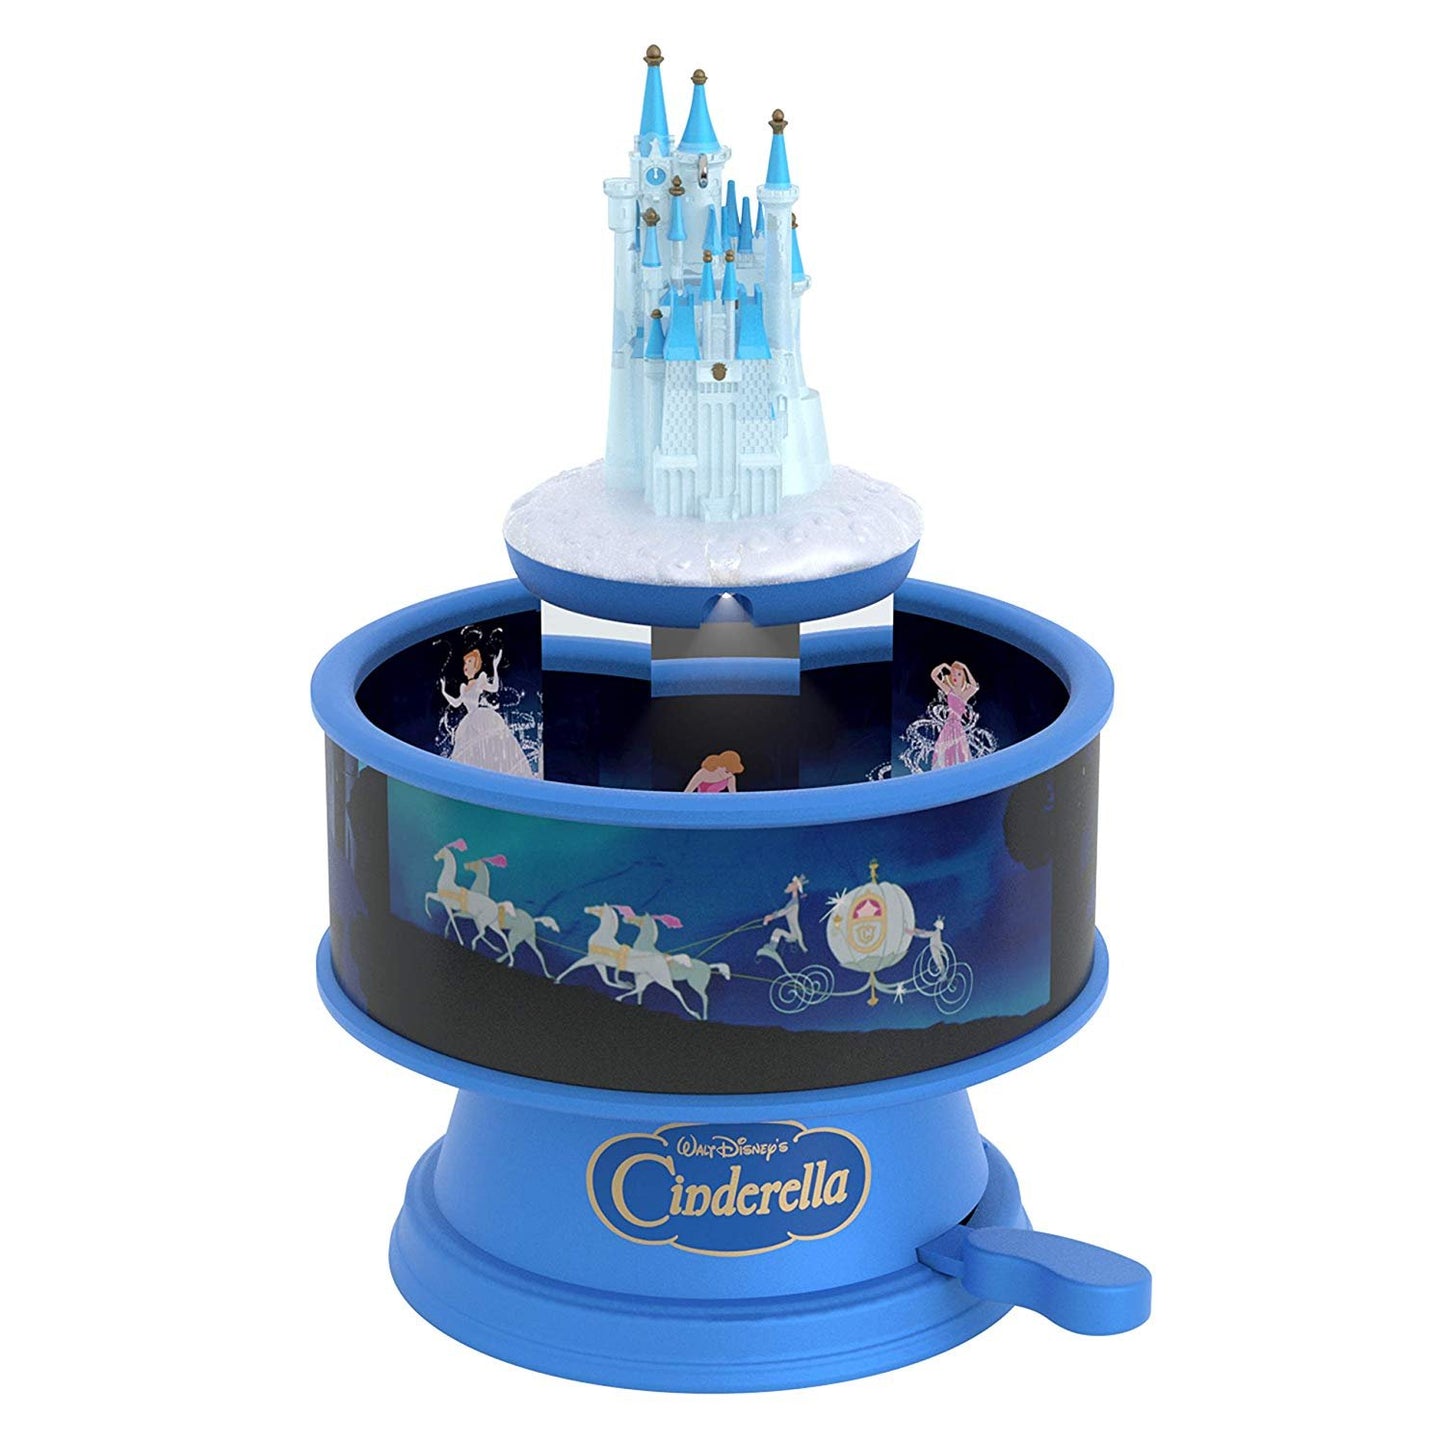 Hallmark Keepsake Christmas Ornament 2019 Year Dated Disney Live Your Story Interactive Castle Musical Tabletop Decoration with Light (Plays Princess's Signature Songs)